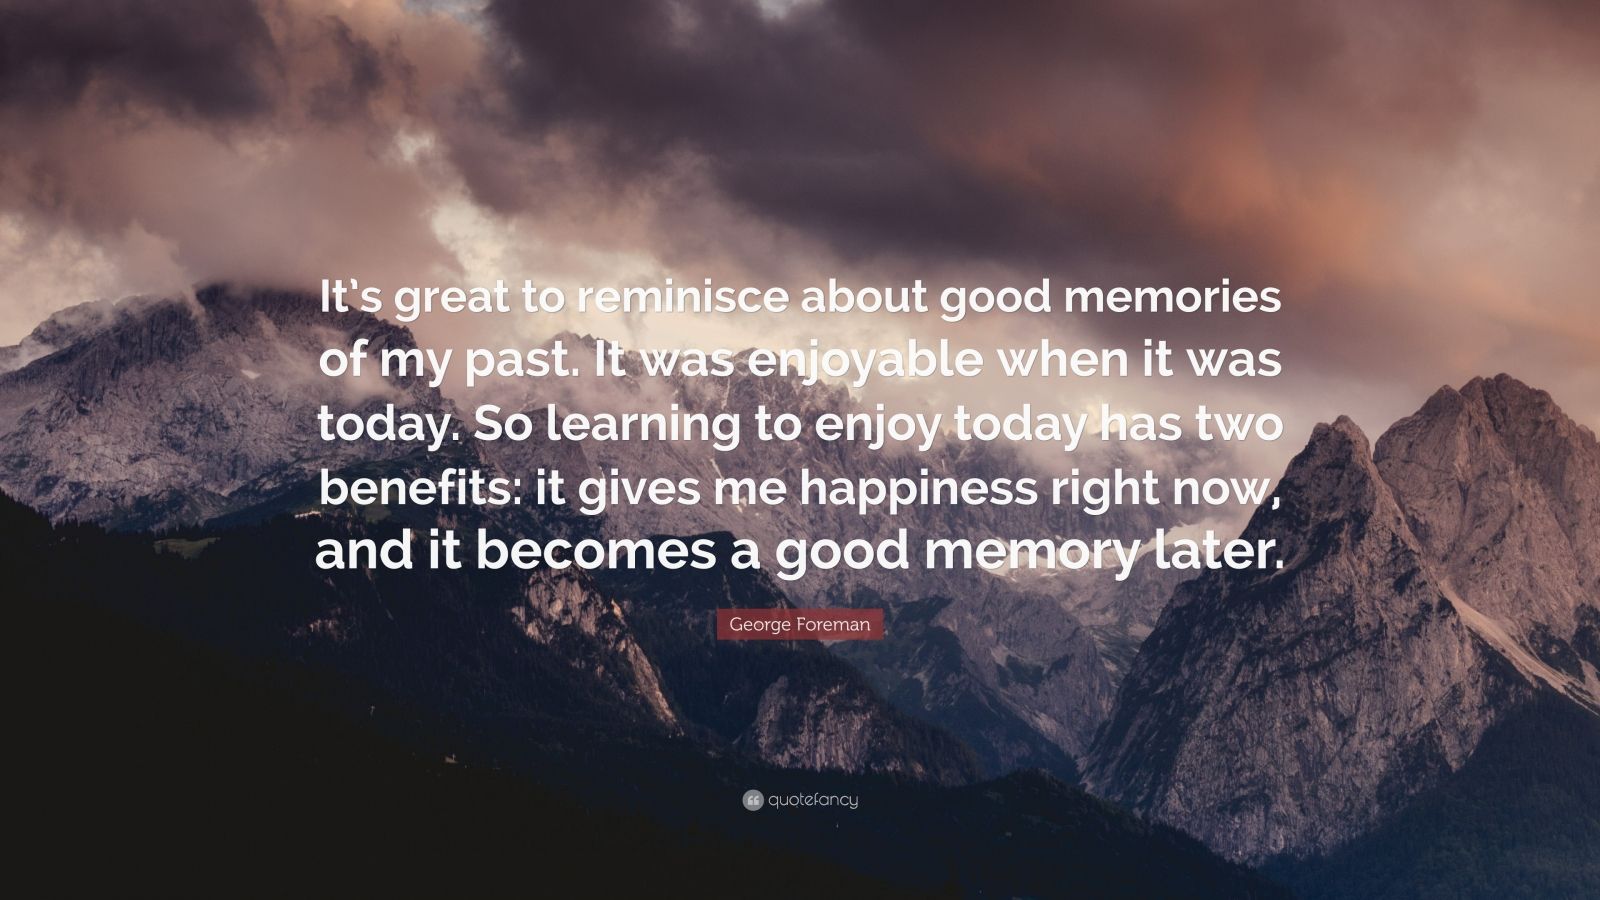 George Foreman Quote: “It’s great to reminisce about good memories of